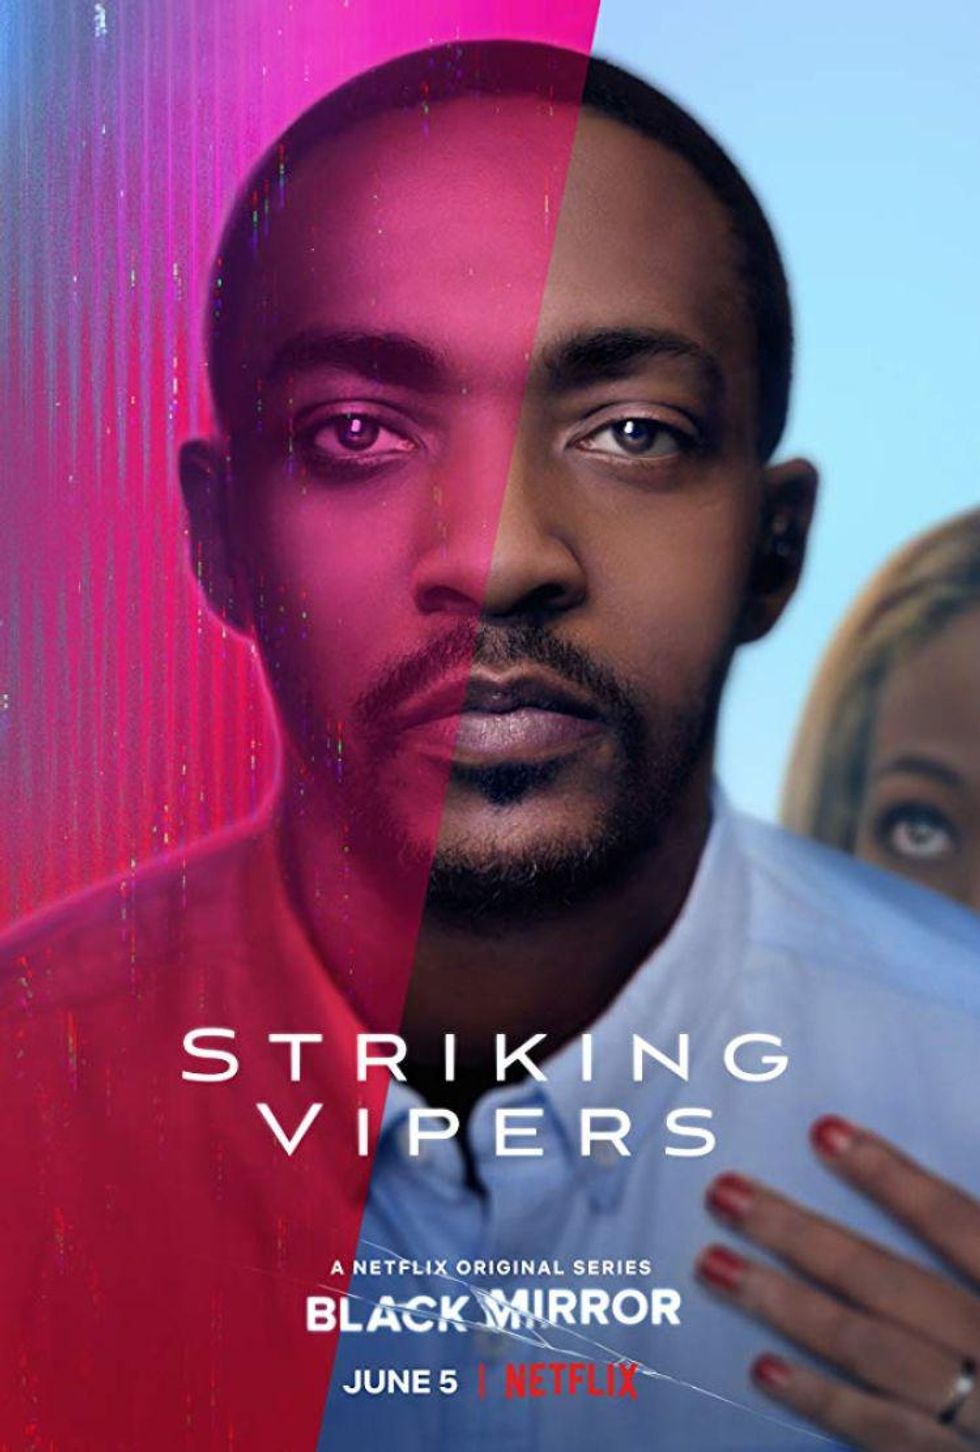 'Black Mirror' Took a Sharp Gay Left Turn in 'Striking Vipers'